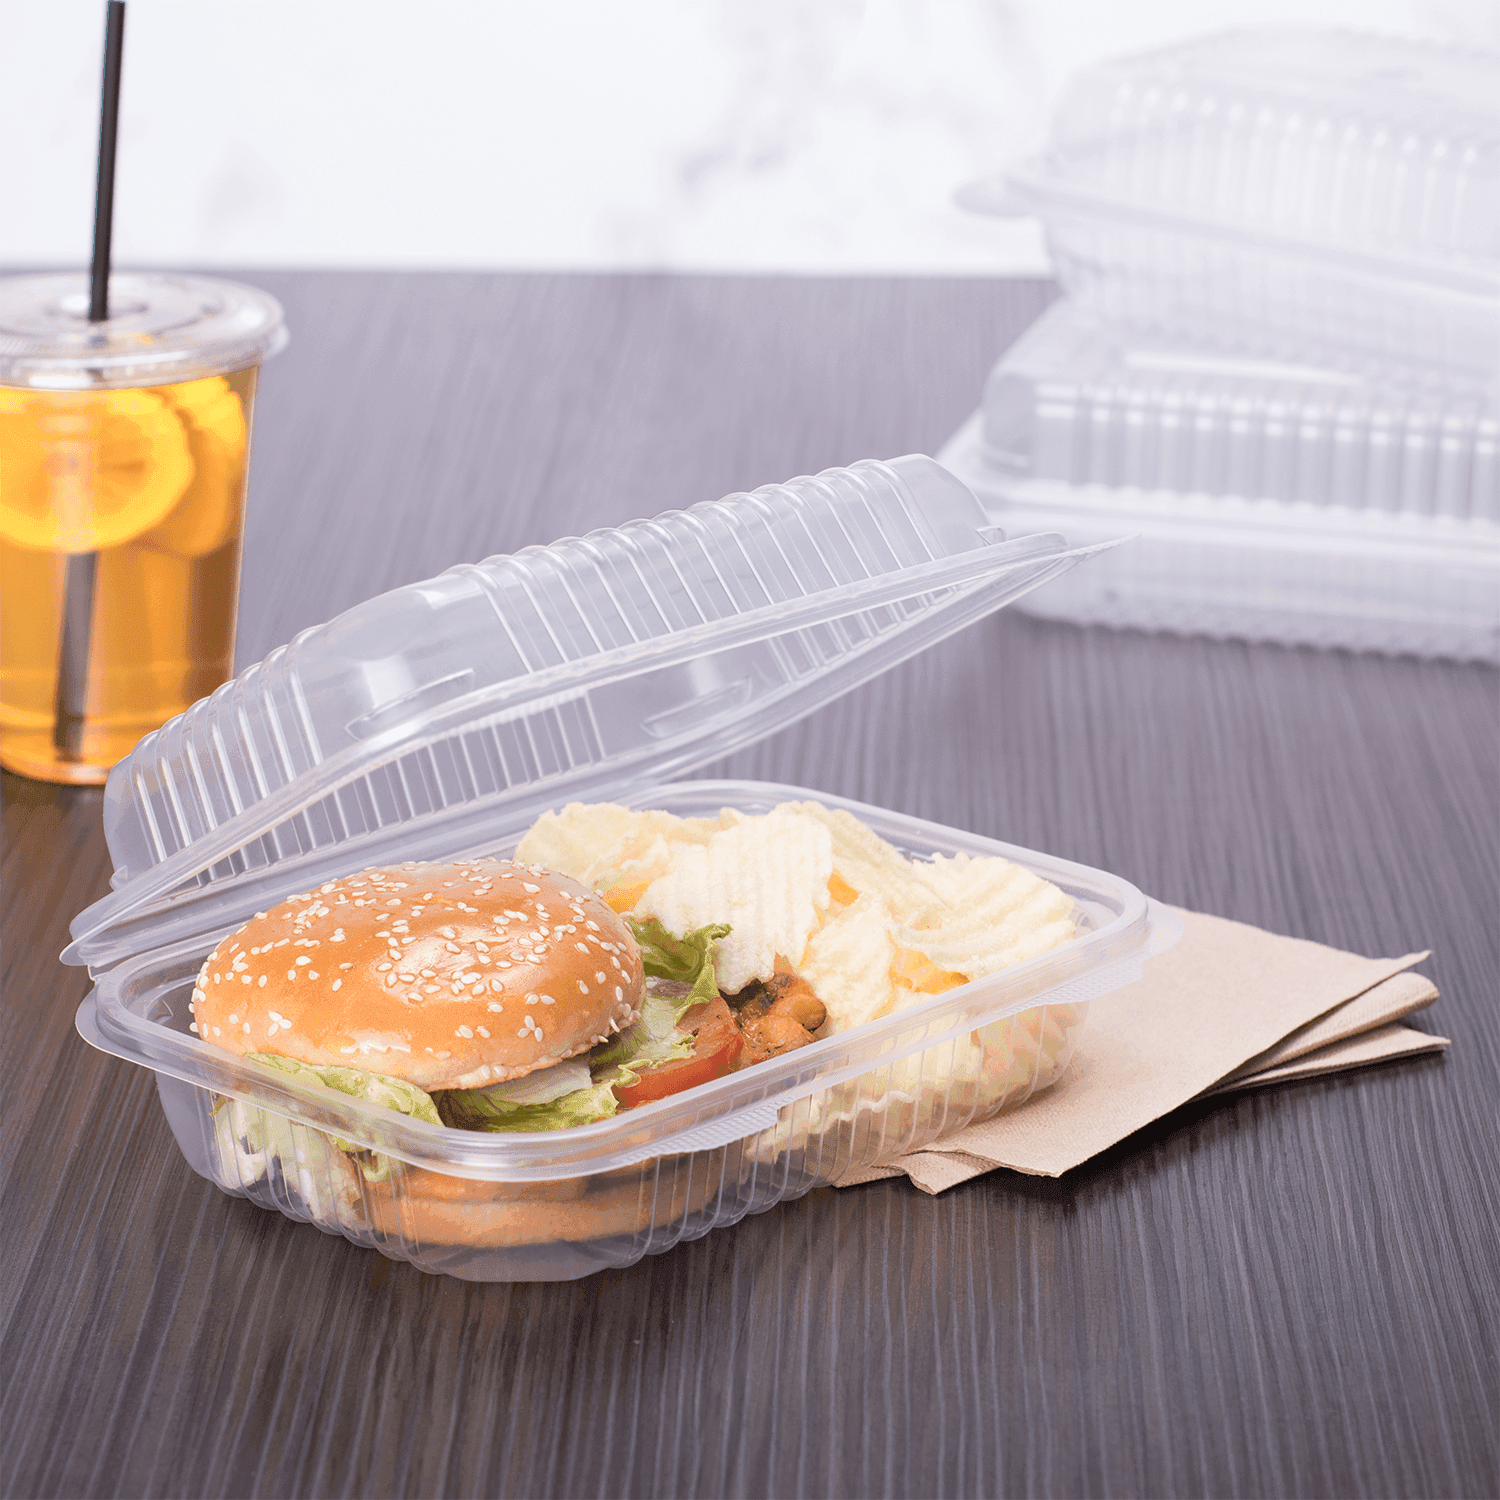 Clear Karat 9'' x 6" PP Plastic Hinged Container stacked with a burger and chips